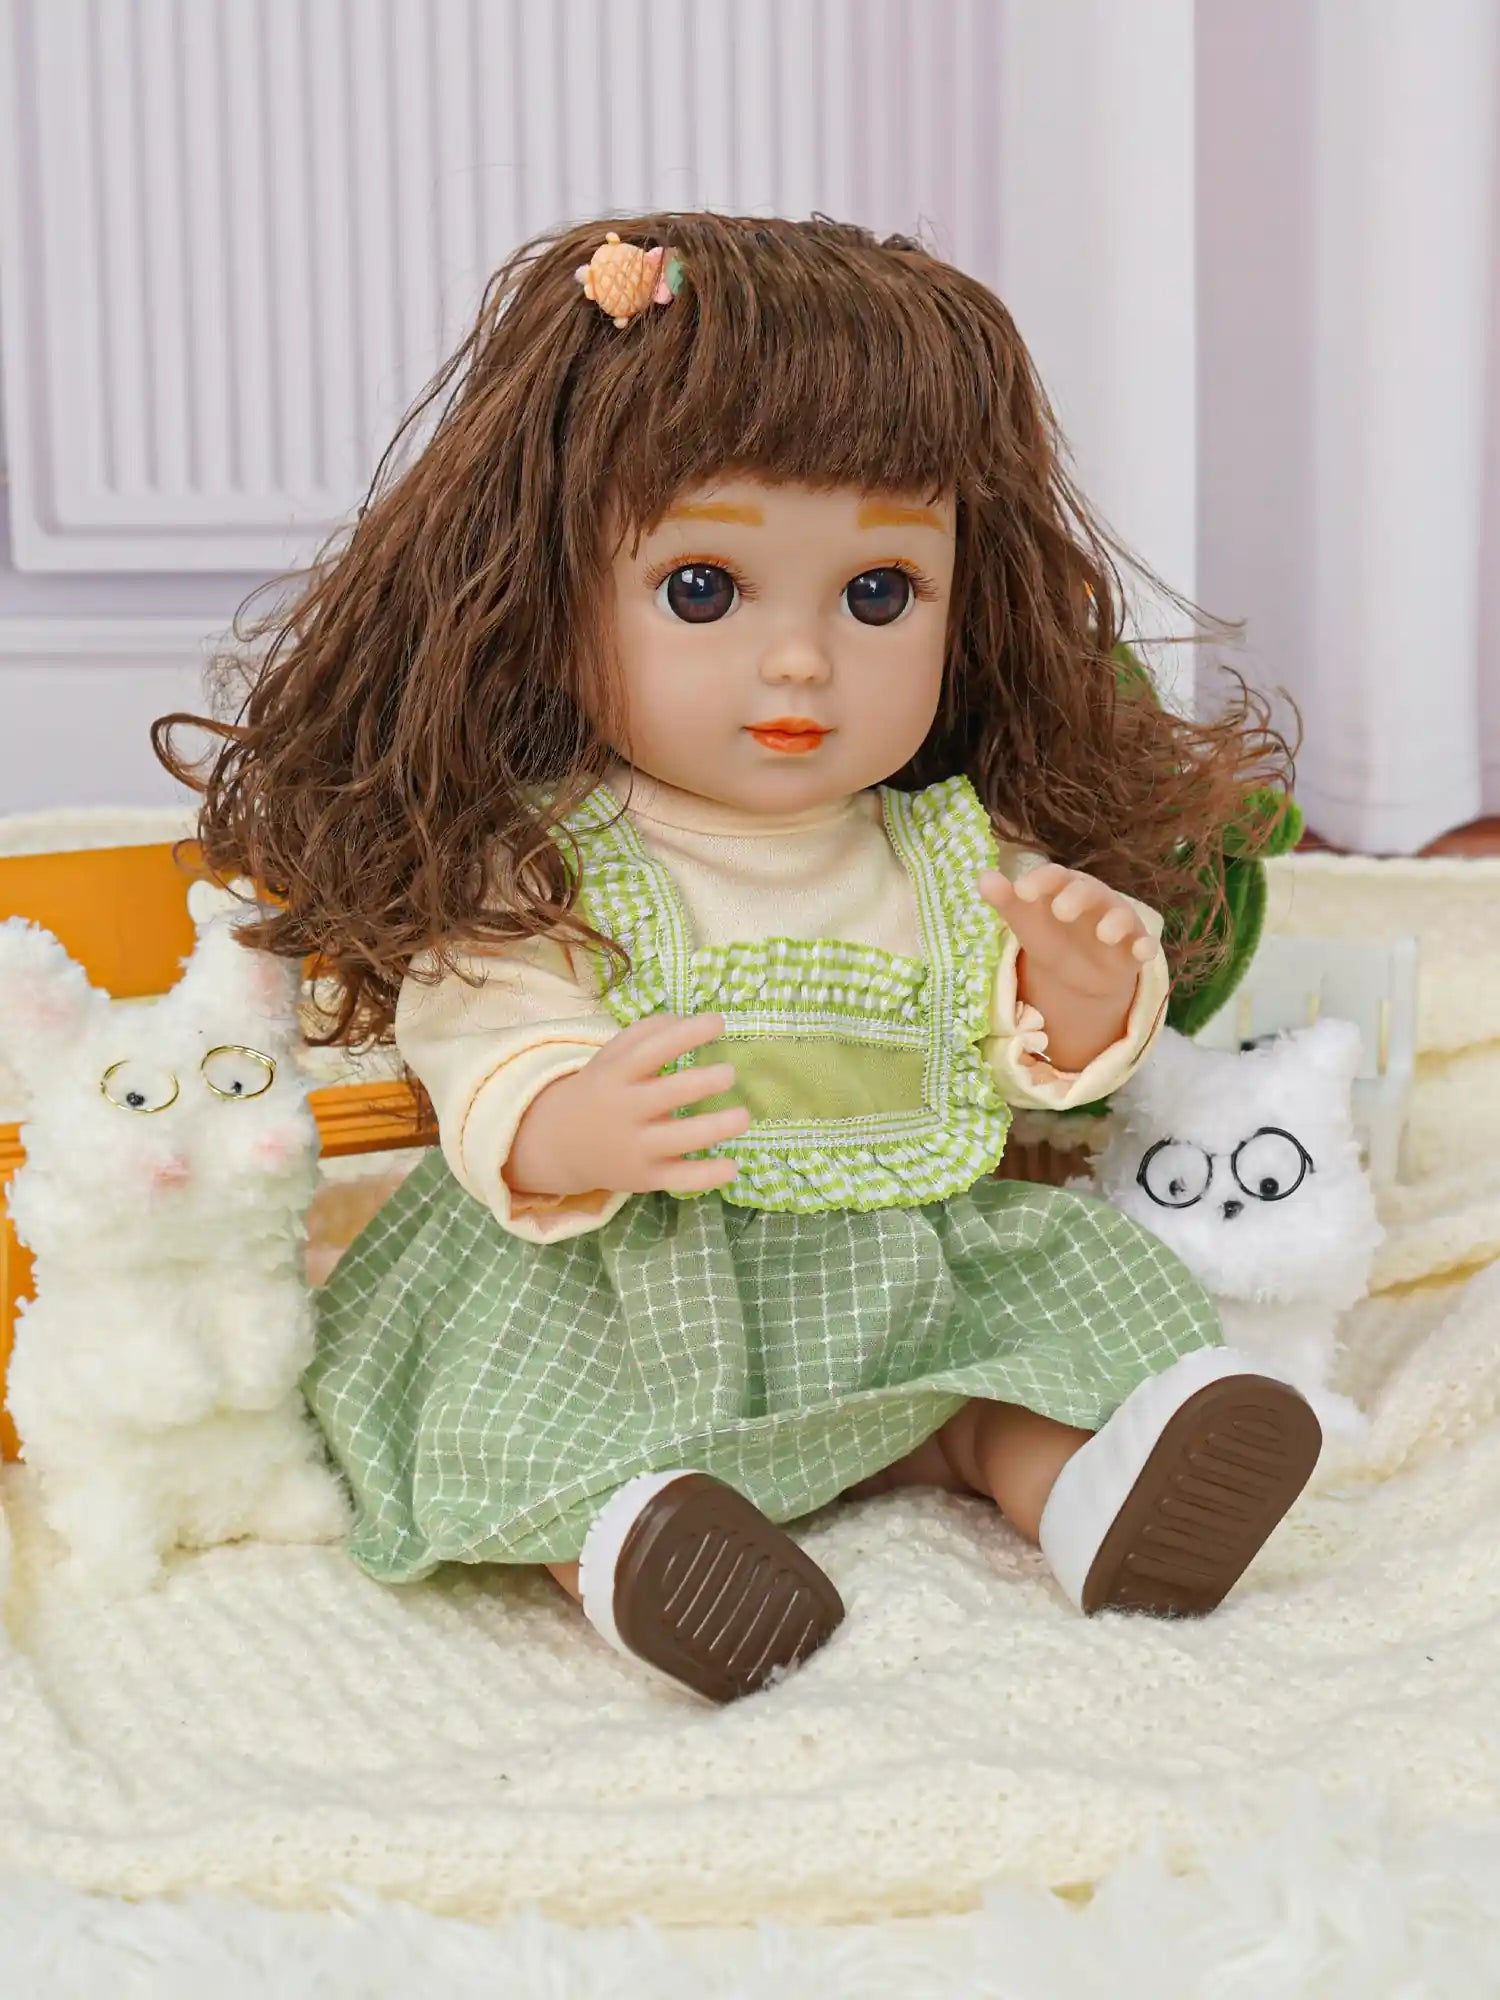 Doll with brown curls, in a checkered dress, accompanied by spectacled dog toys.